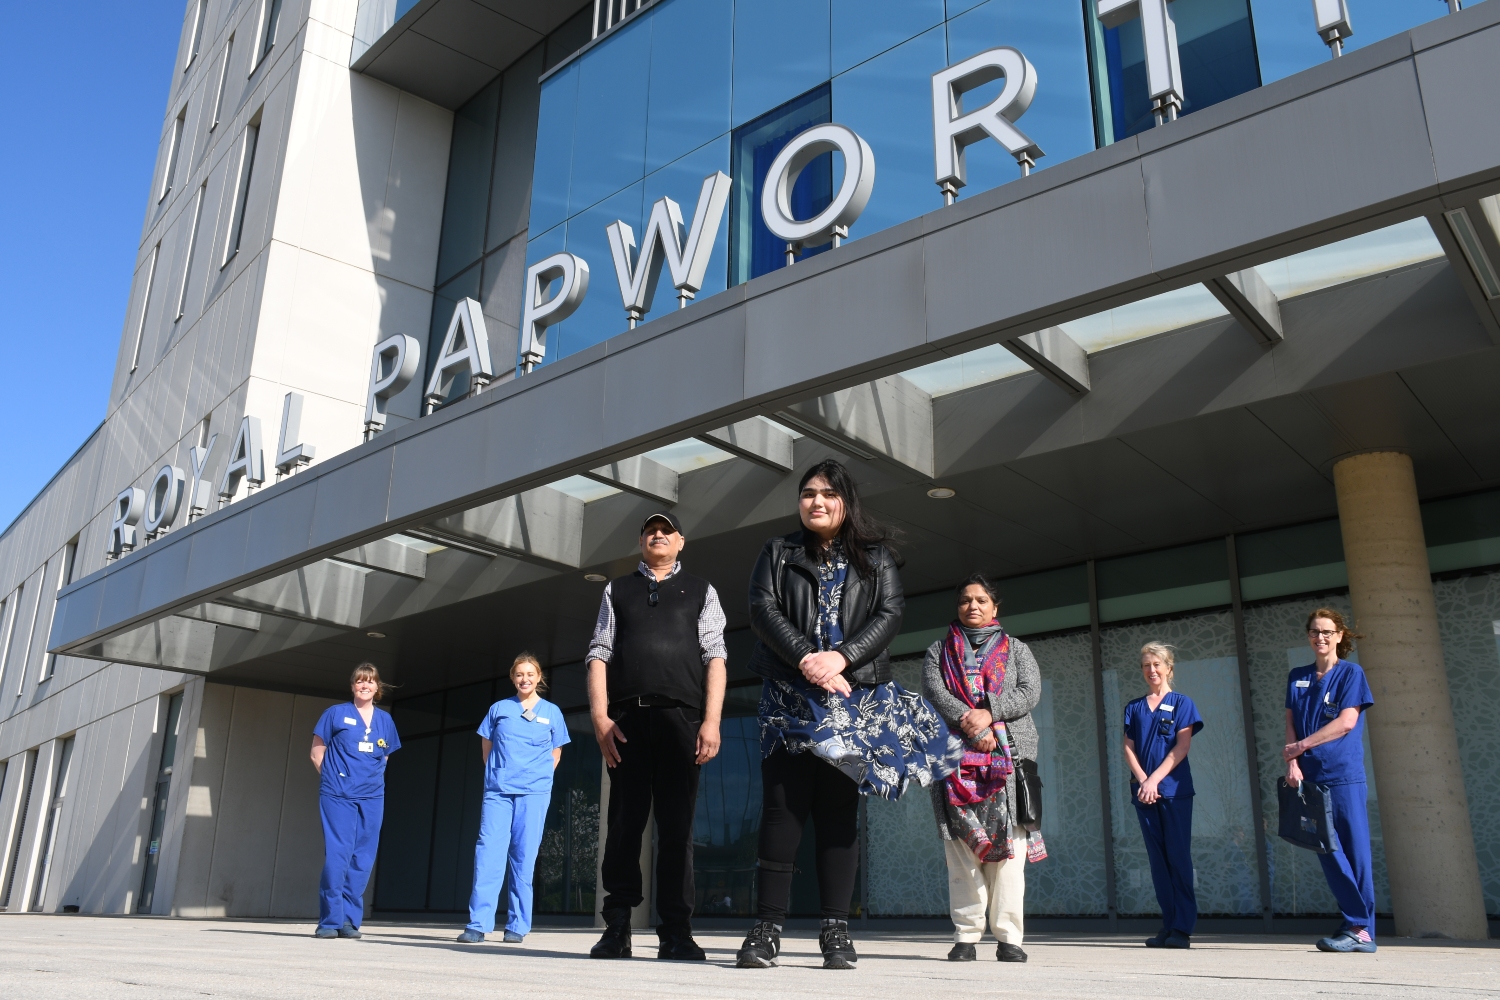 Areeb standing outside a sign saying 'Royal Papworth' with her mum, dad and nurses in blue scrubs either side of her